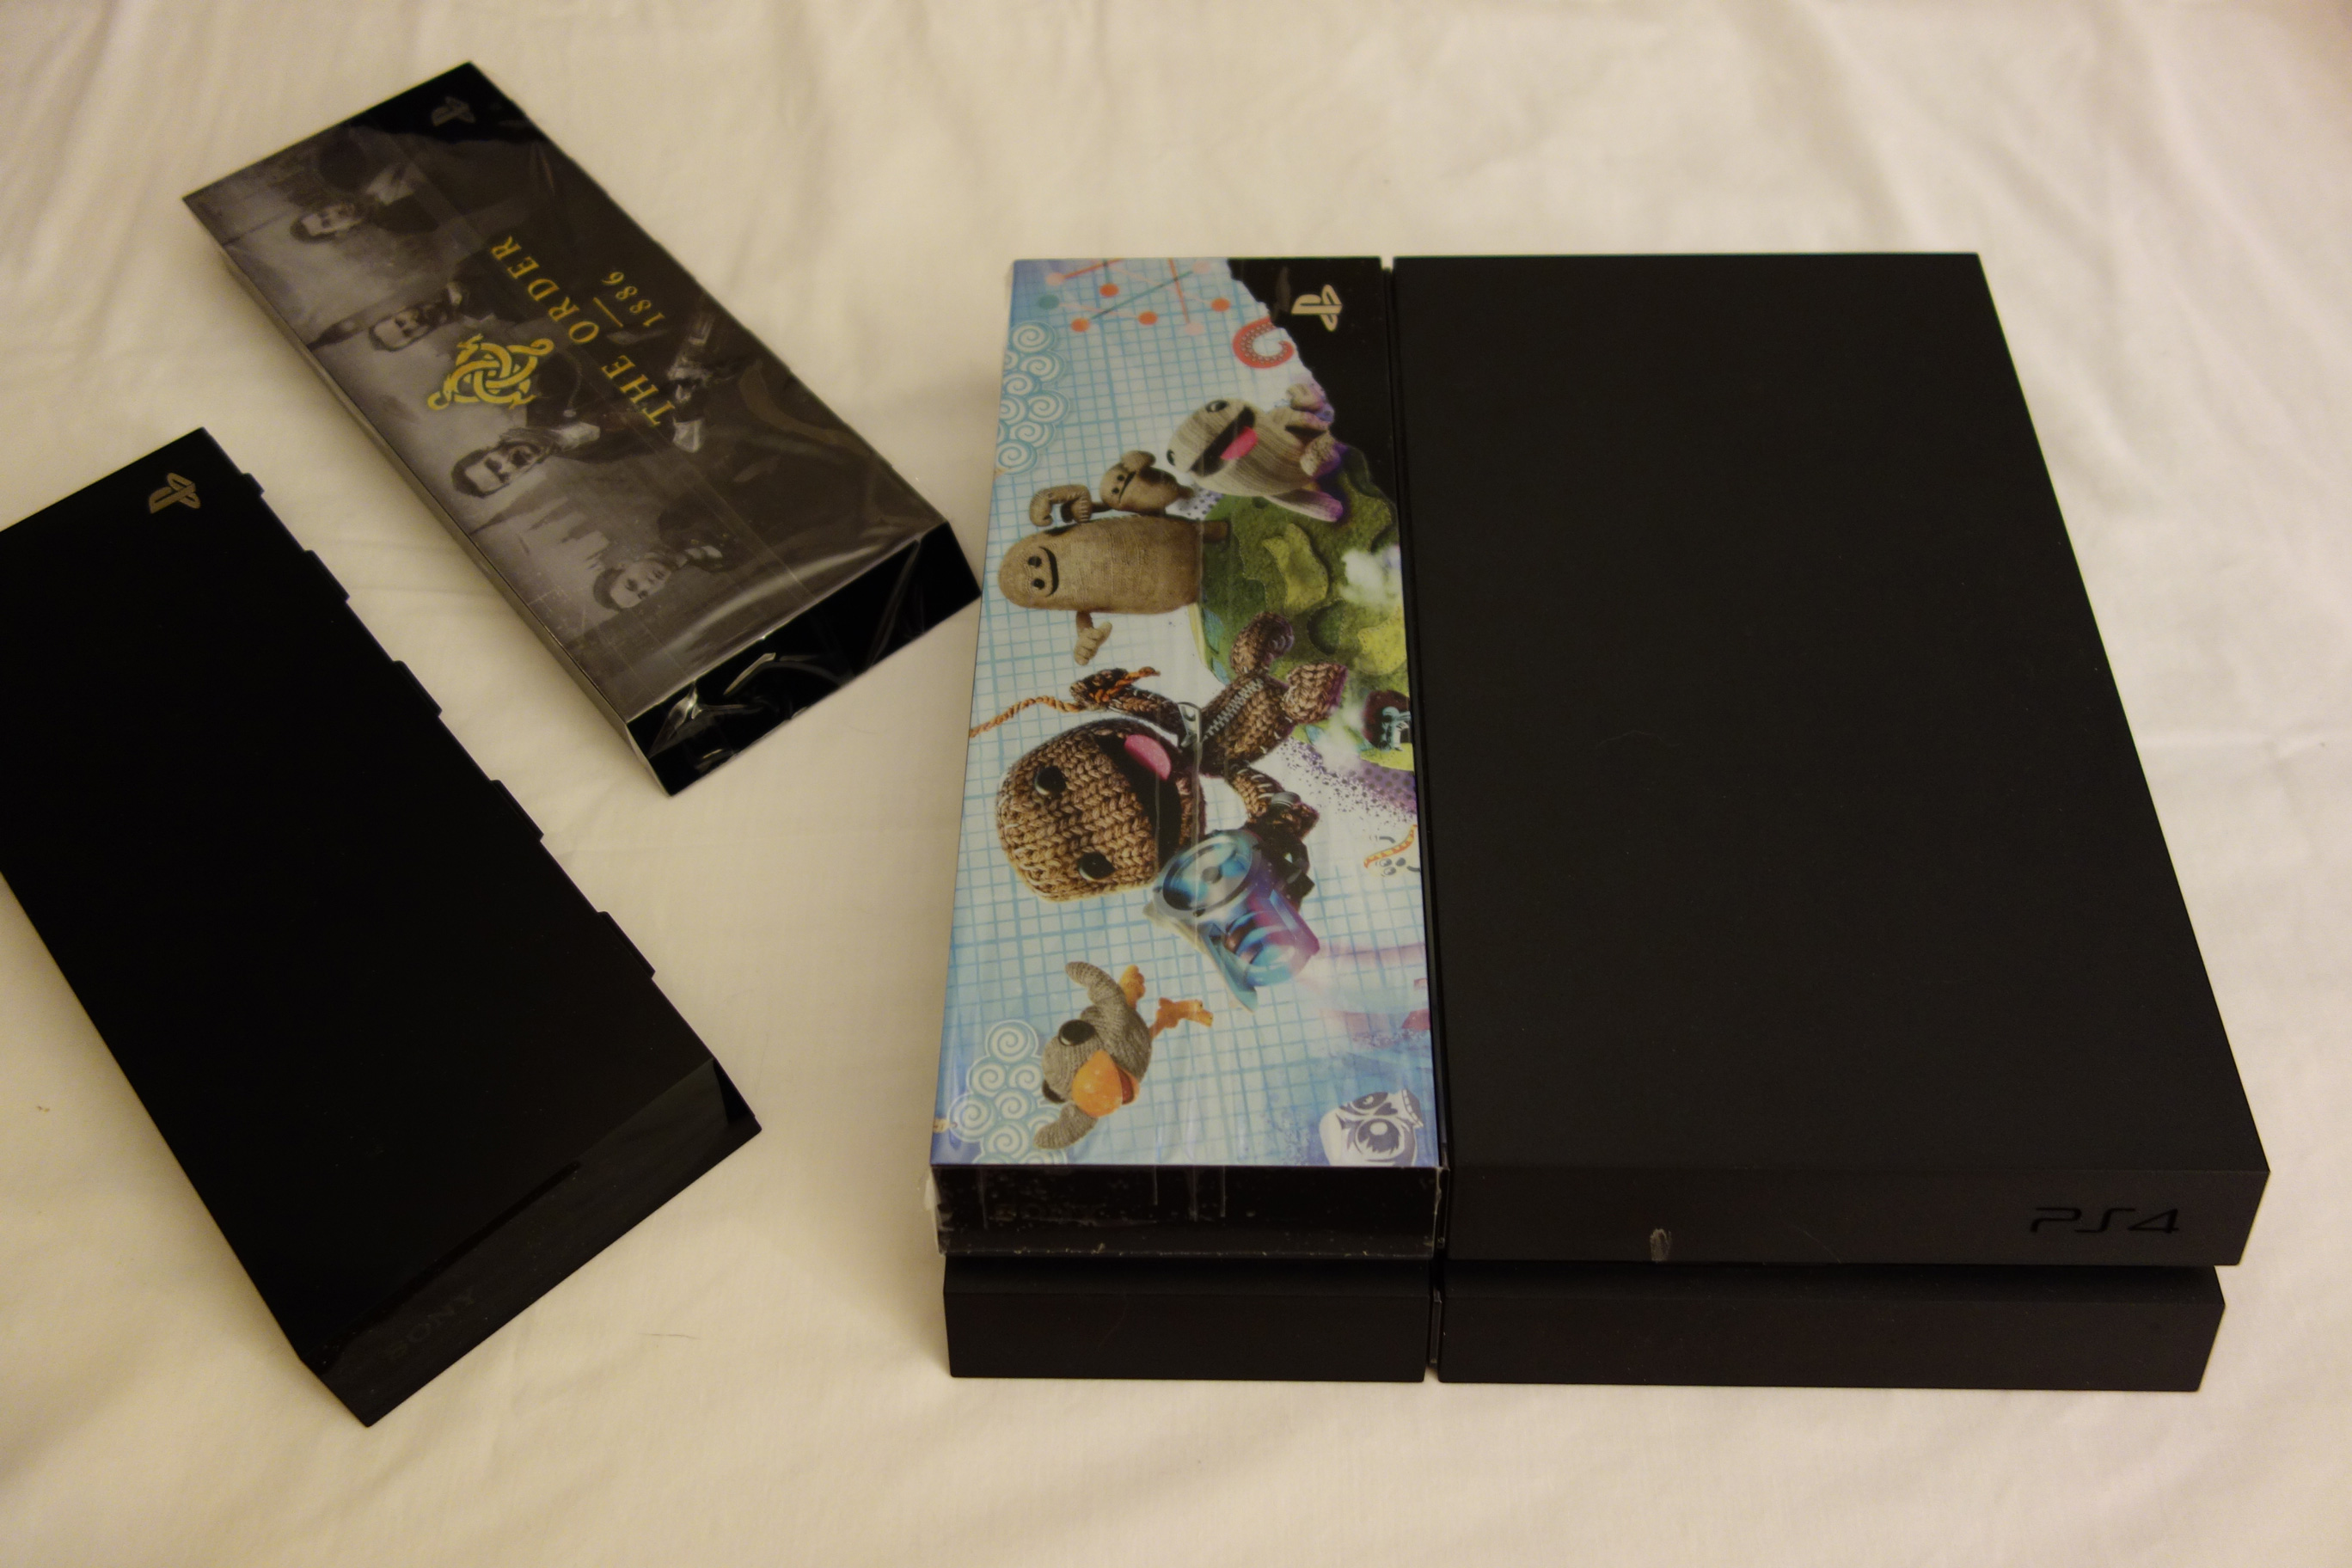 Project Skylight Limited Edition PS4 HDD Cover Faceplate